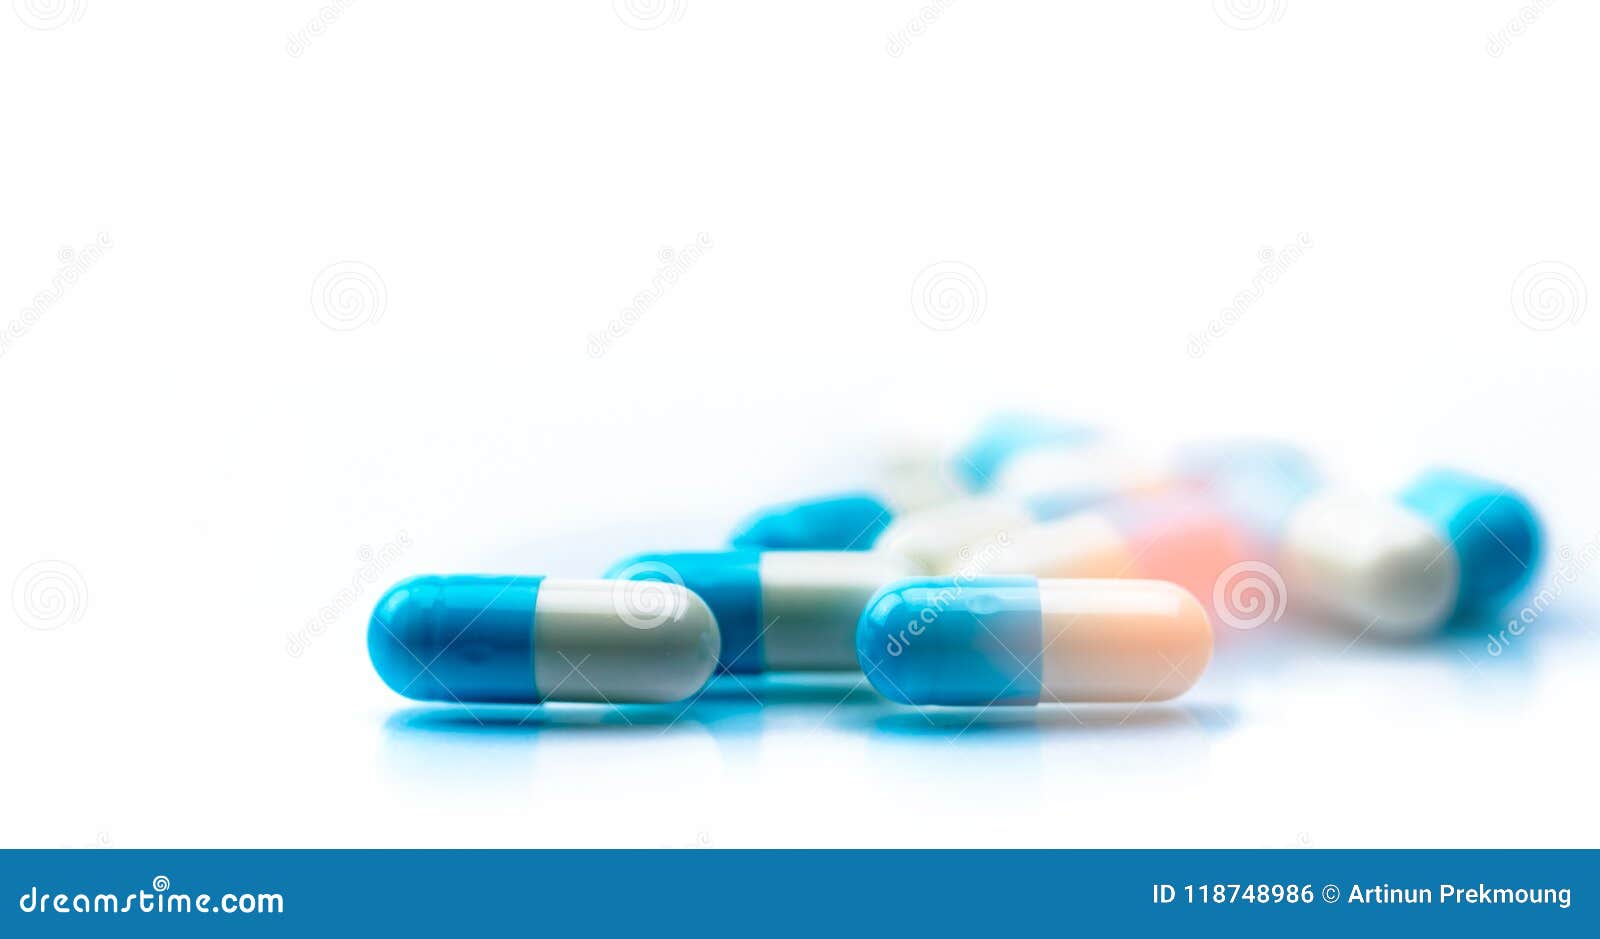 selective focus on blue and white capsules pill spread on white background with shadow. global healthcare concept. antibiotics